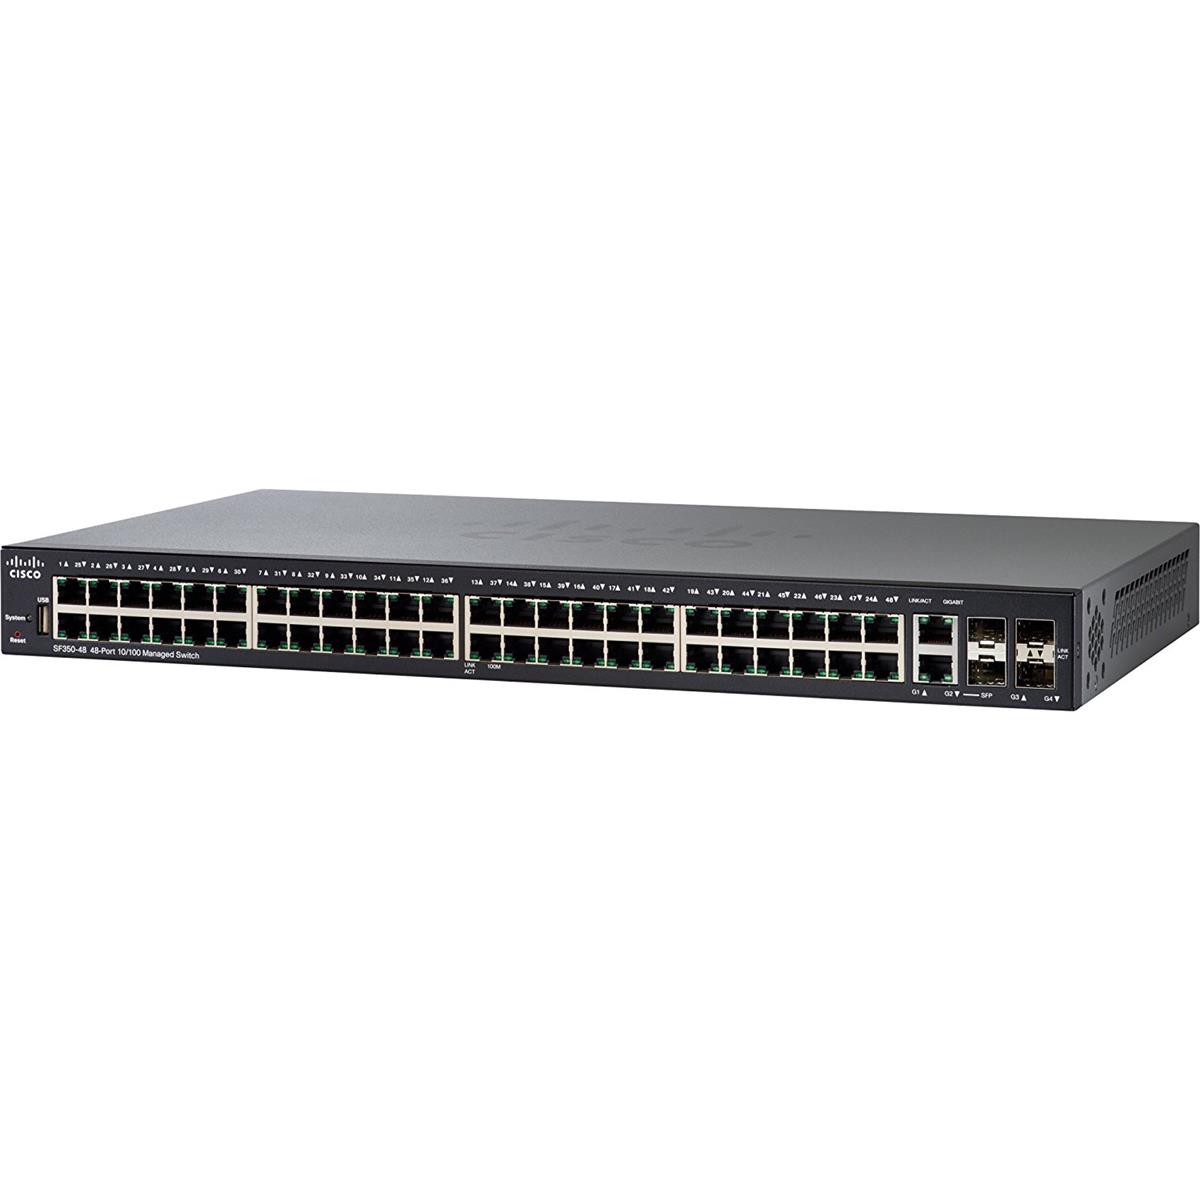 Image of Cisco SF350-48 48 Port 10/100 Managed Switch